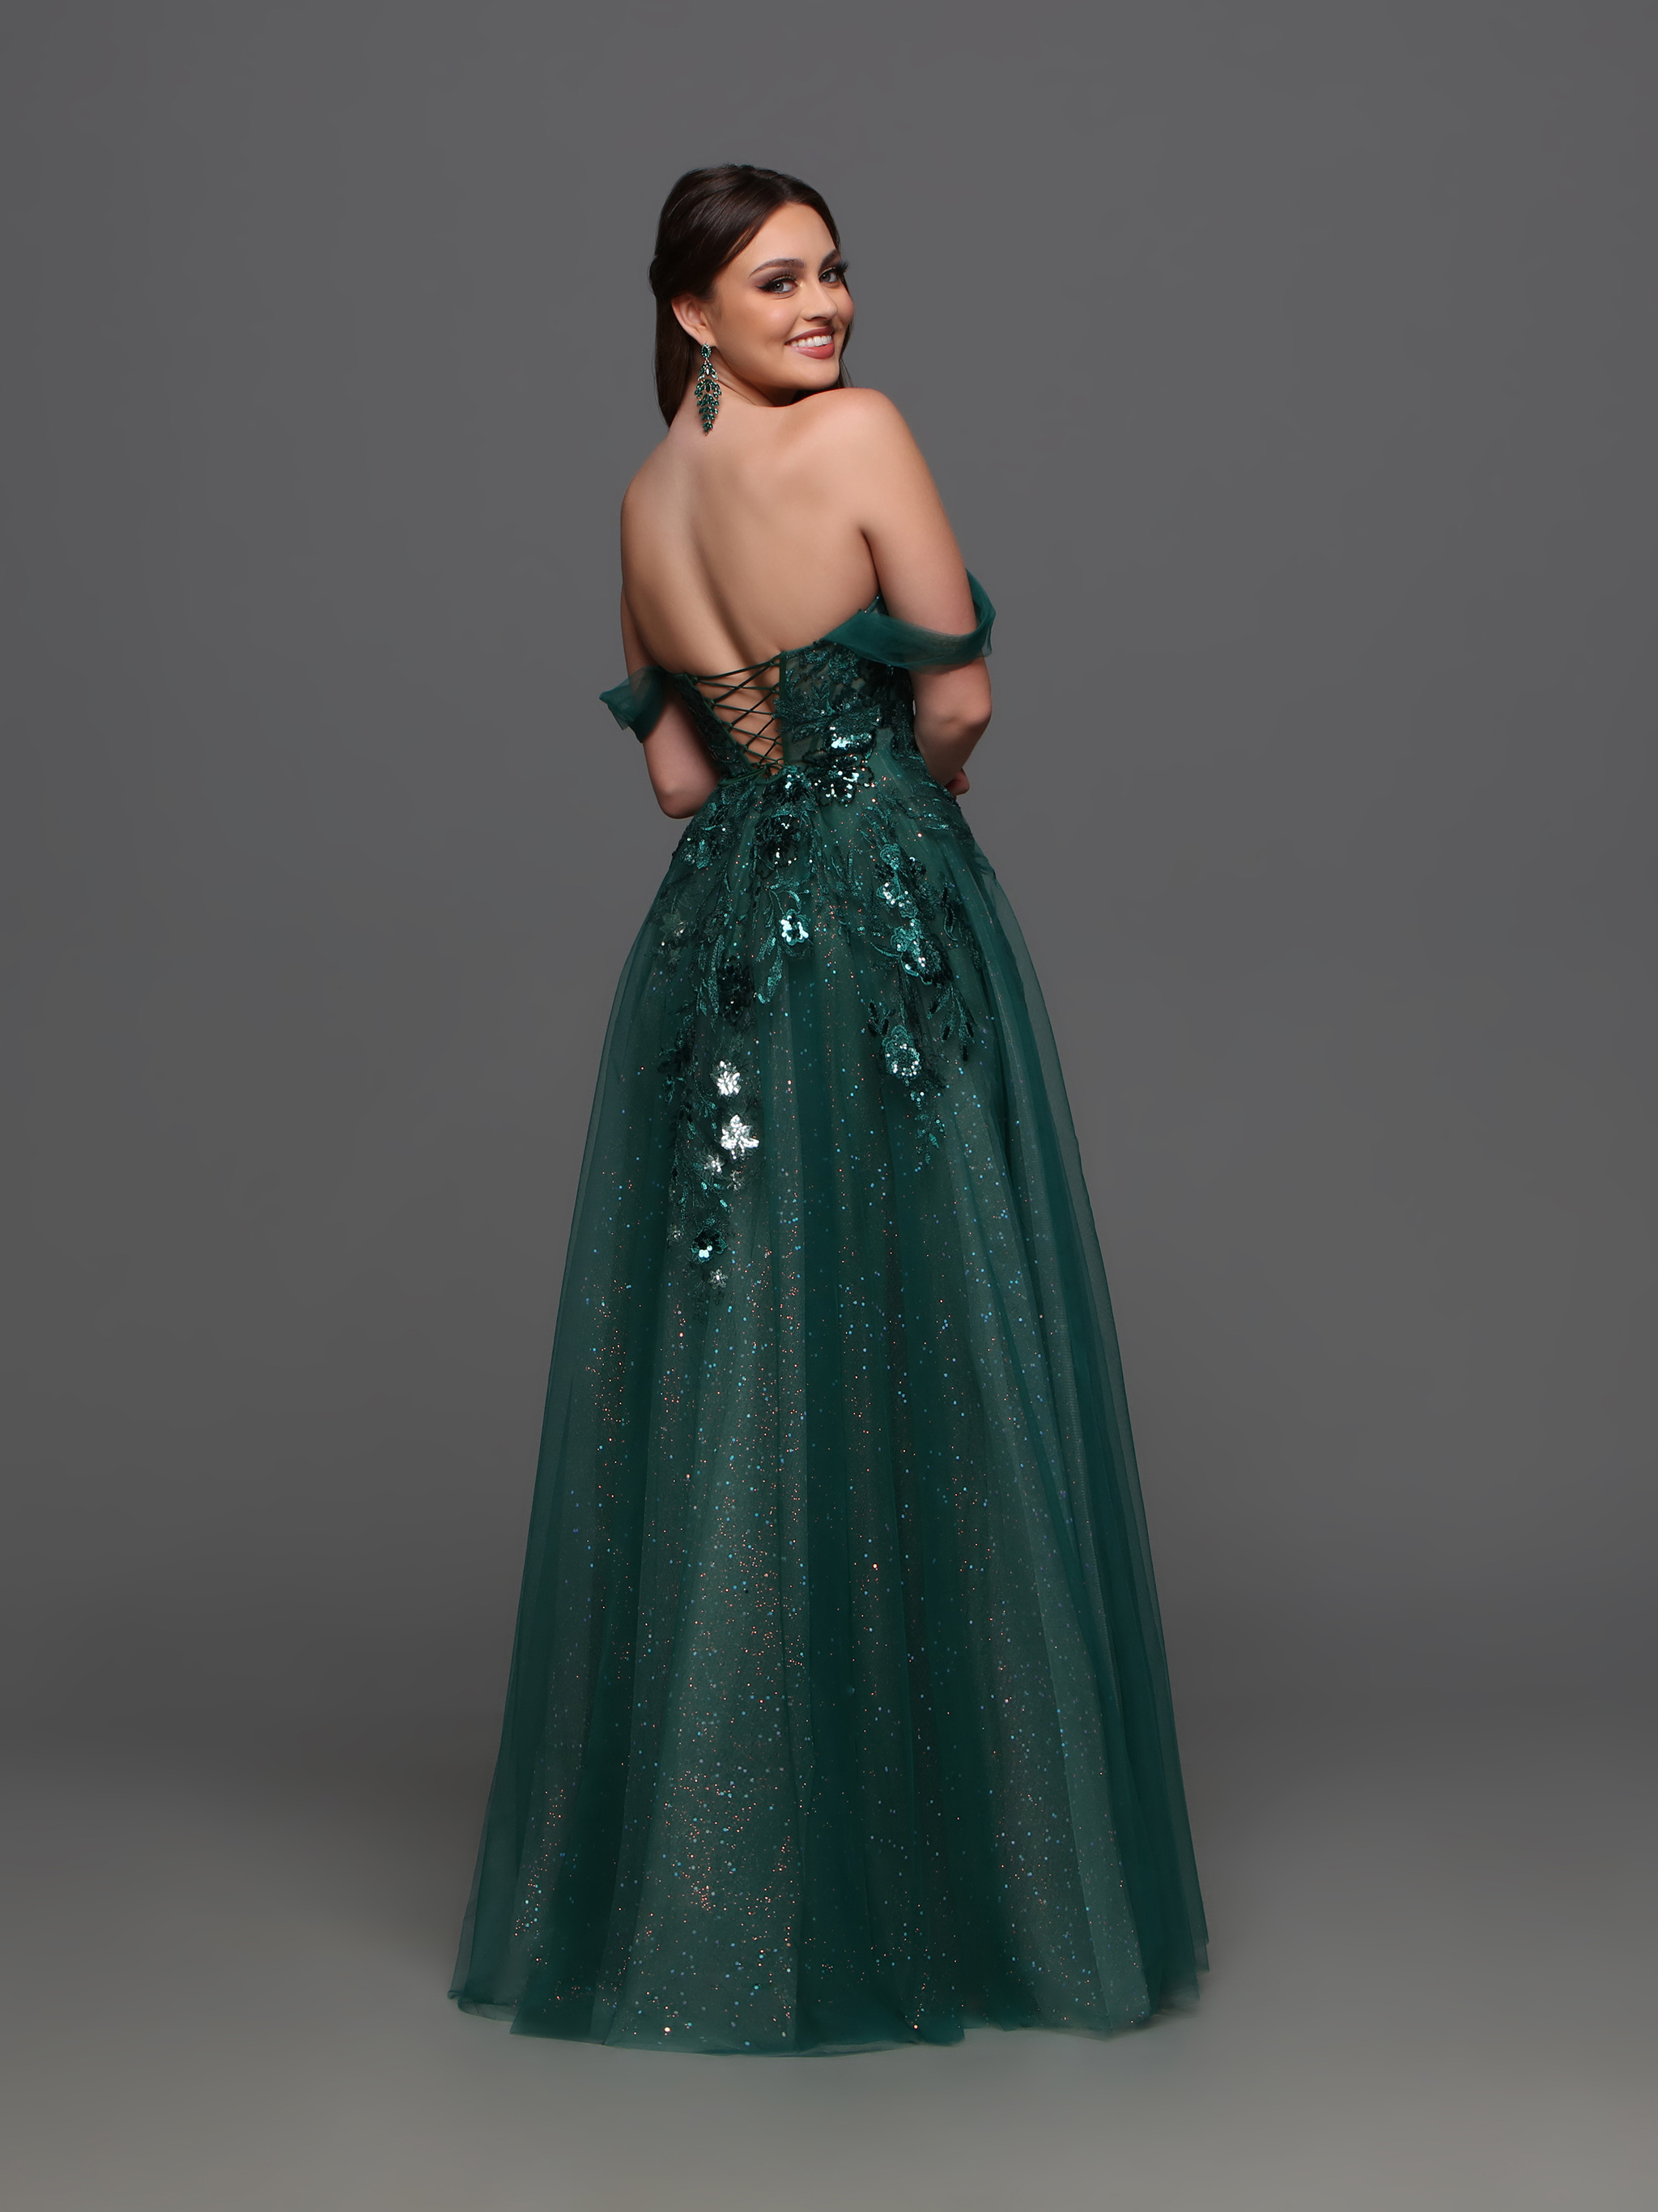 Image showing back view of style #72316